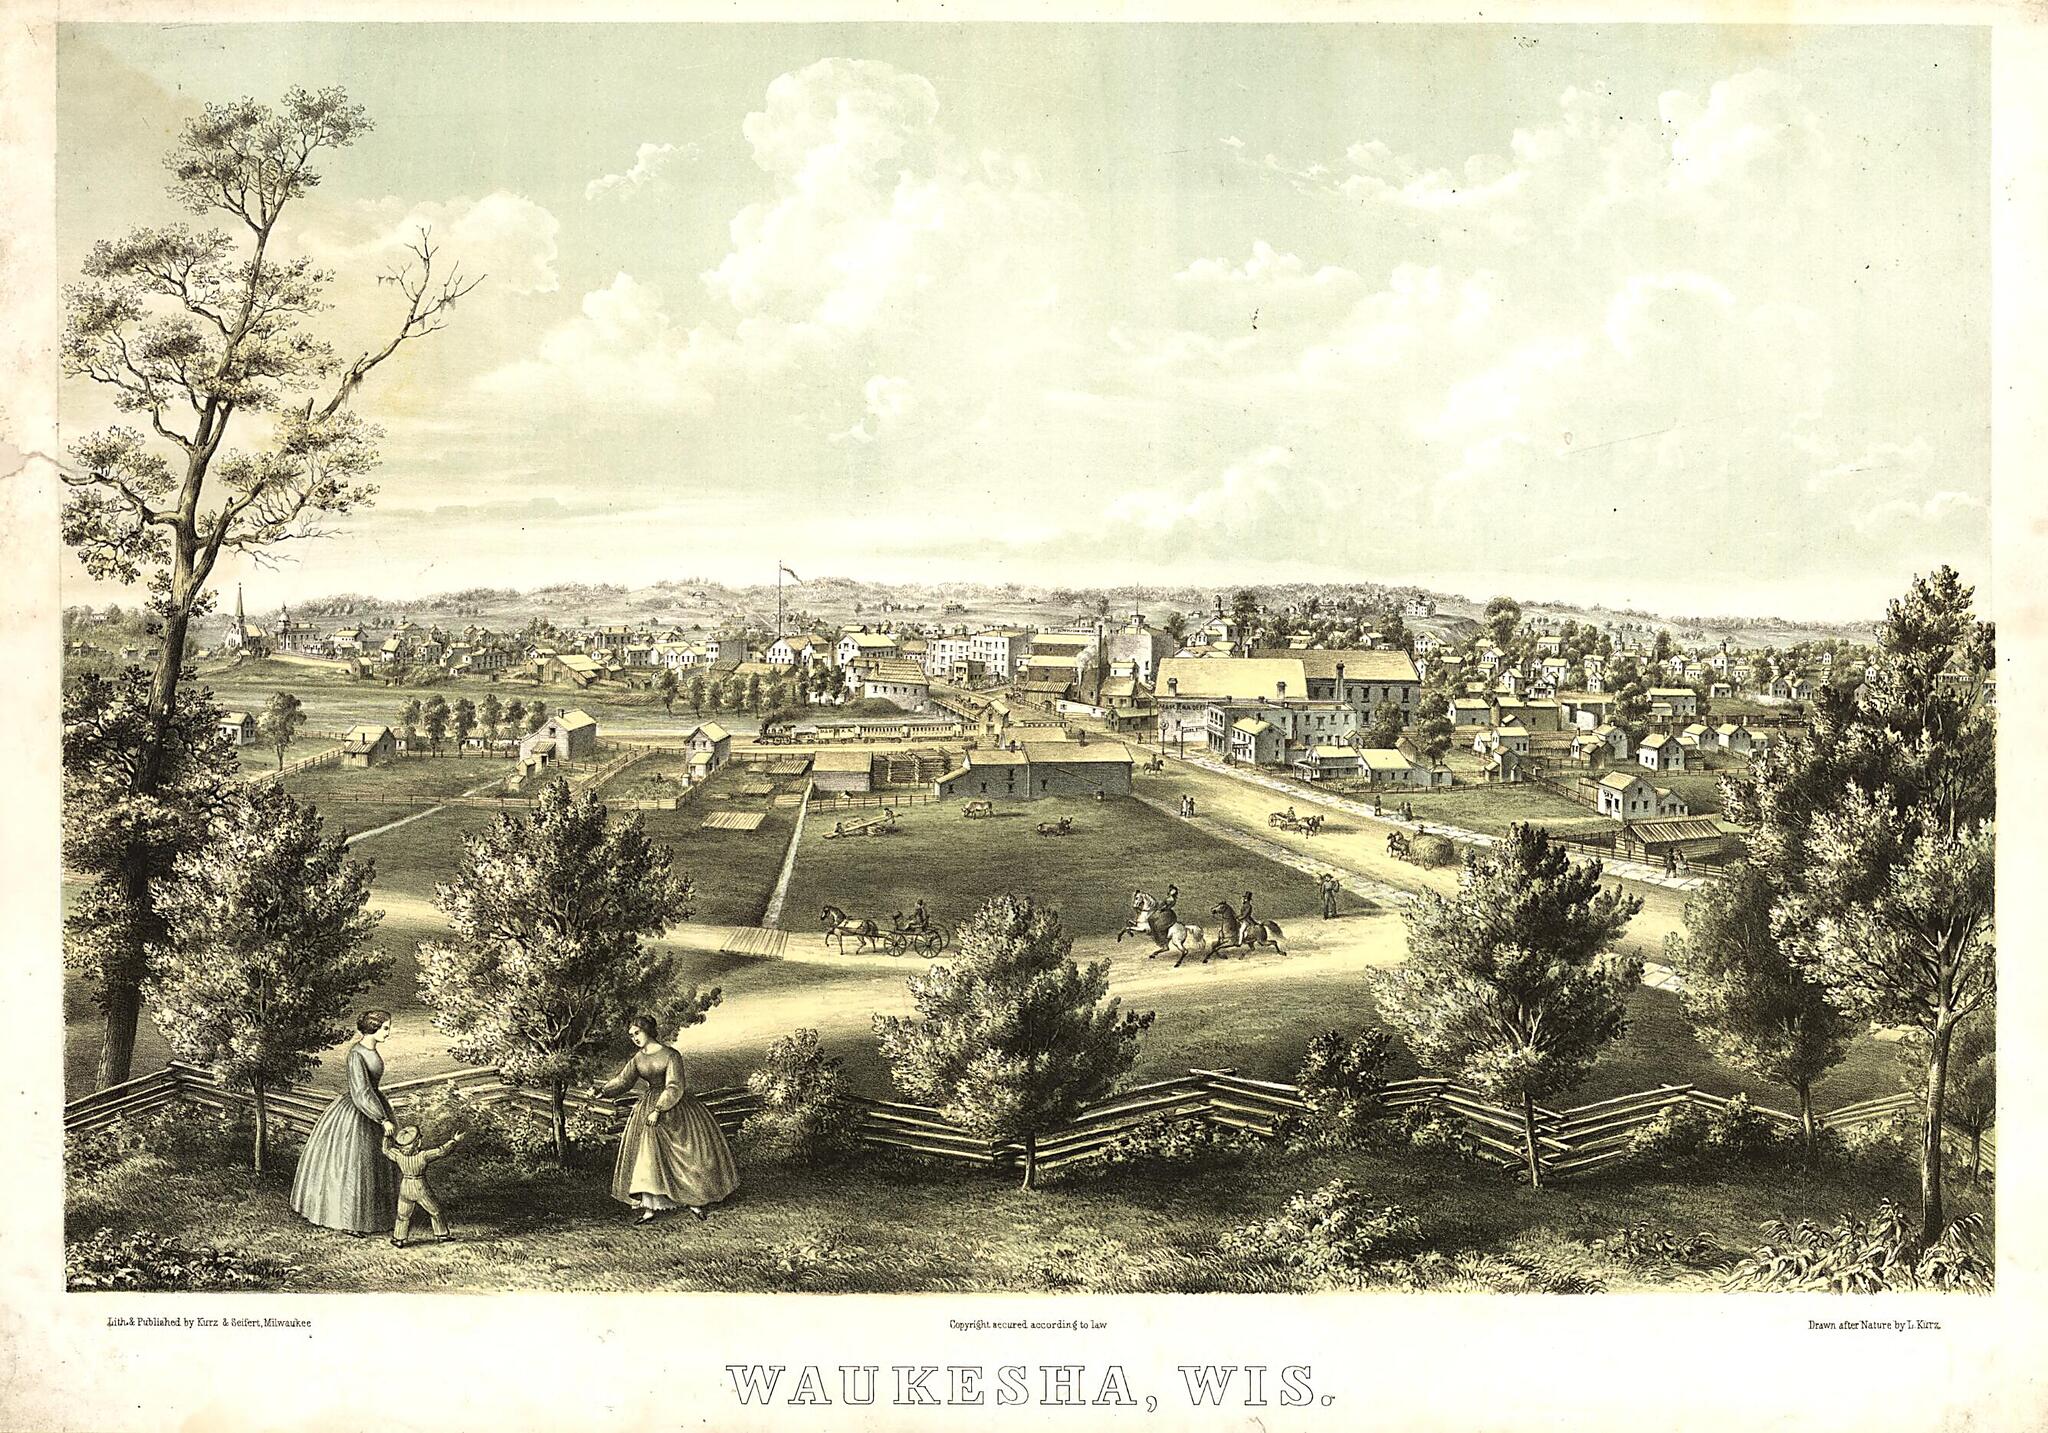 This old map of Waukesha,Wisconsin / Lith. &amp; Published by Kurz &amp; Seifert, Milwaukee ; Drawn After Nature by L. Kurz from 1857 was created by Louis Kurz in 1857